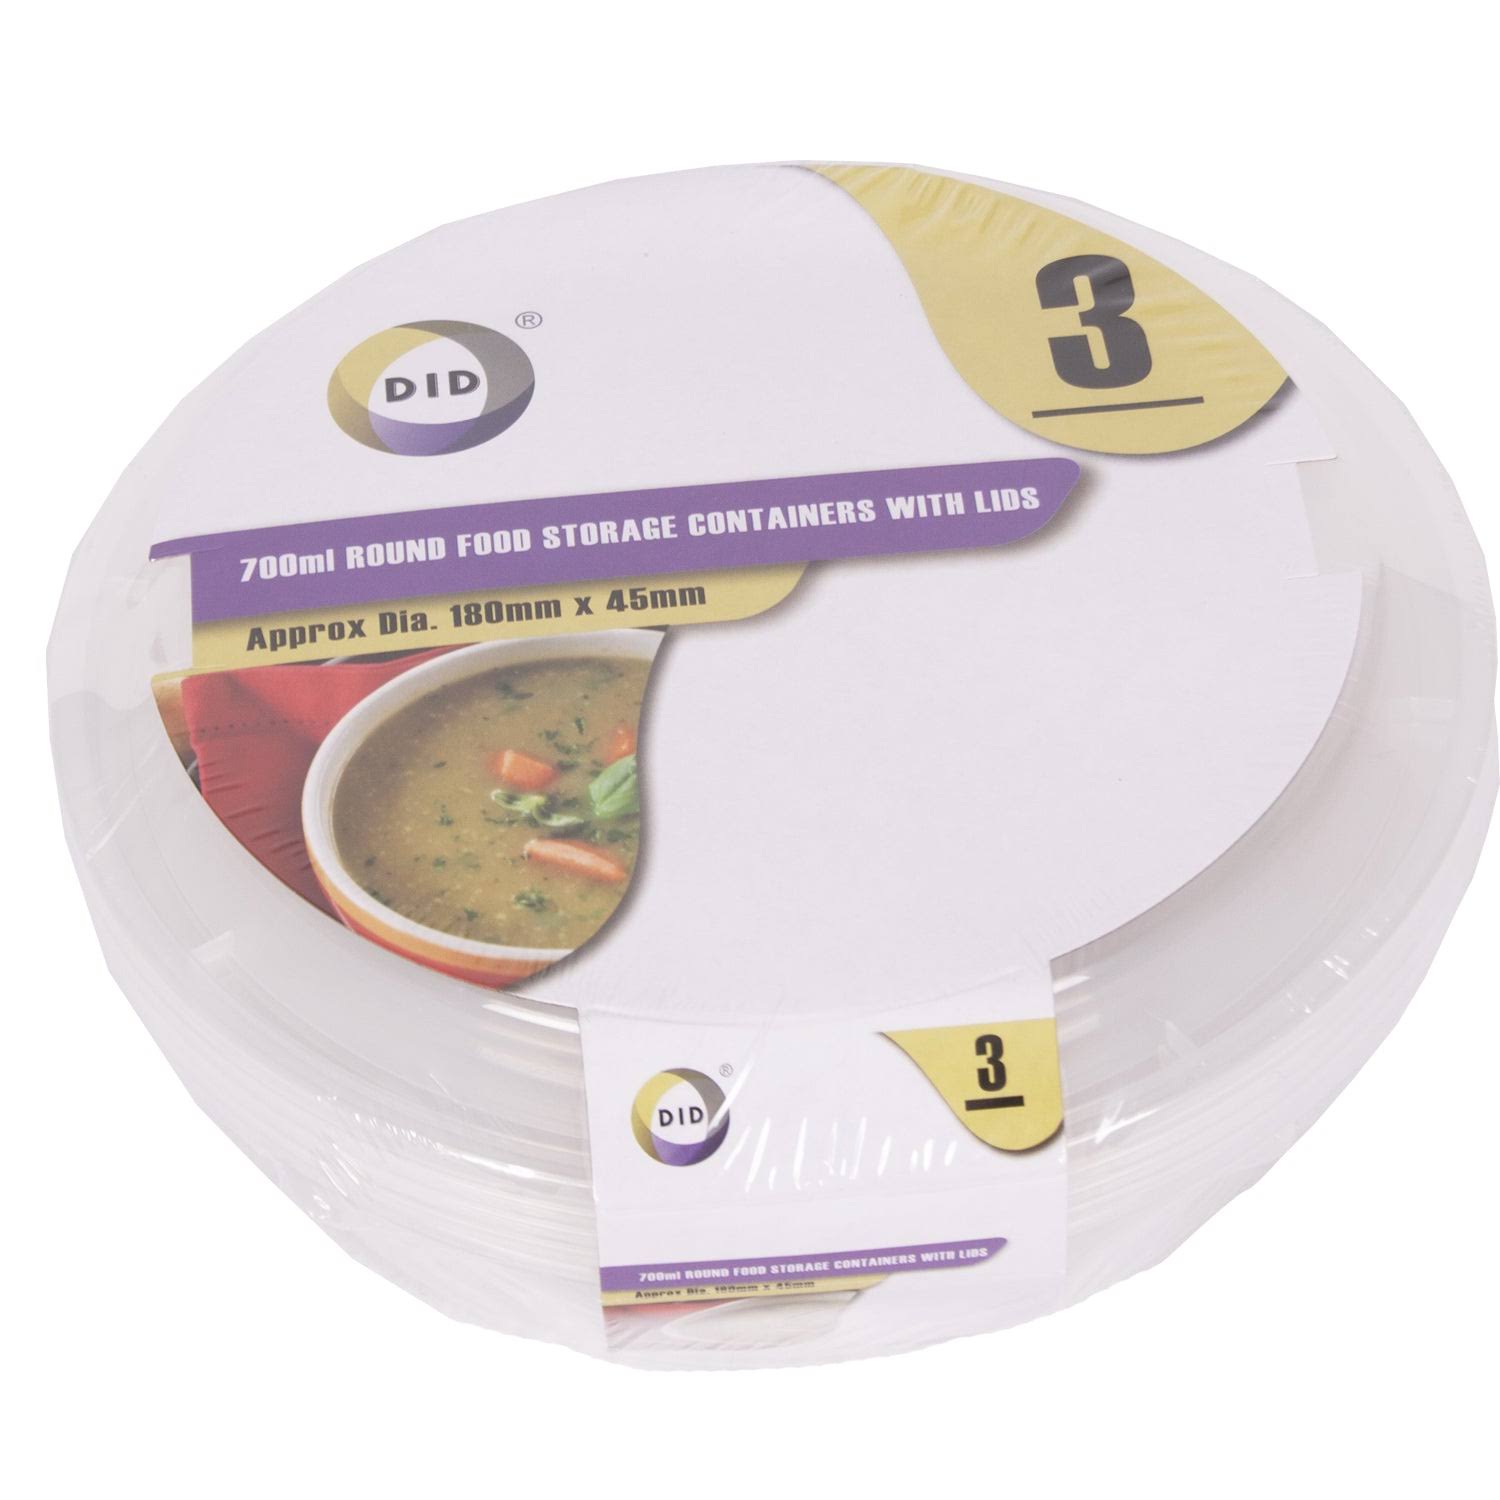 DID Food Containers with Lids - Round 3 Pack 700ml